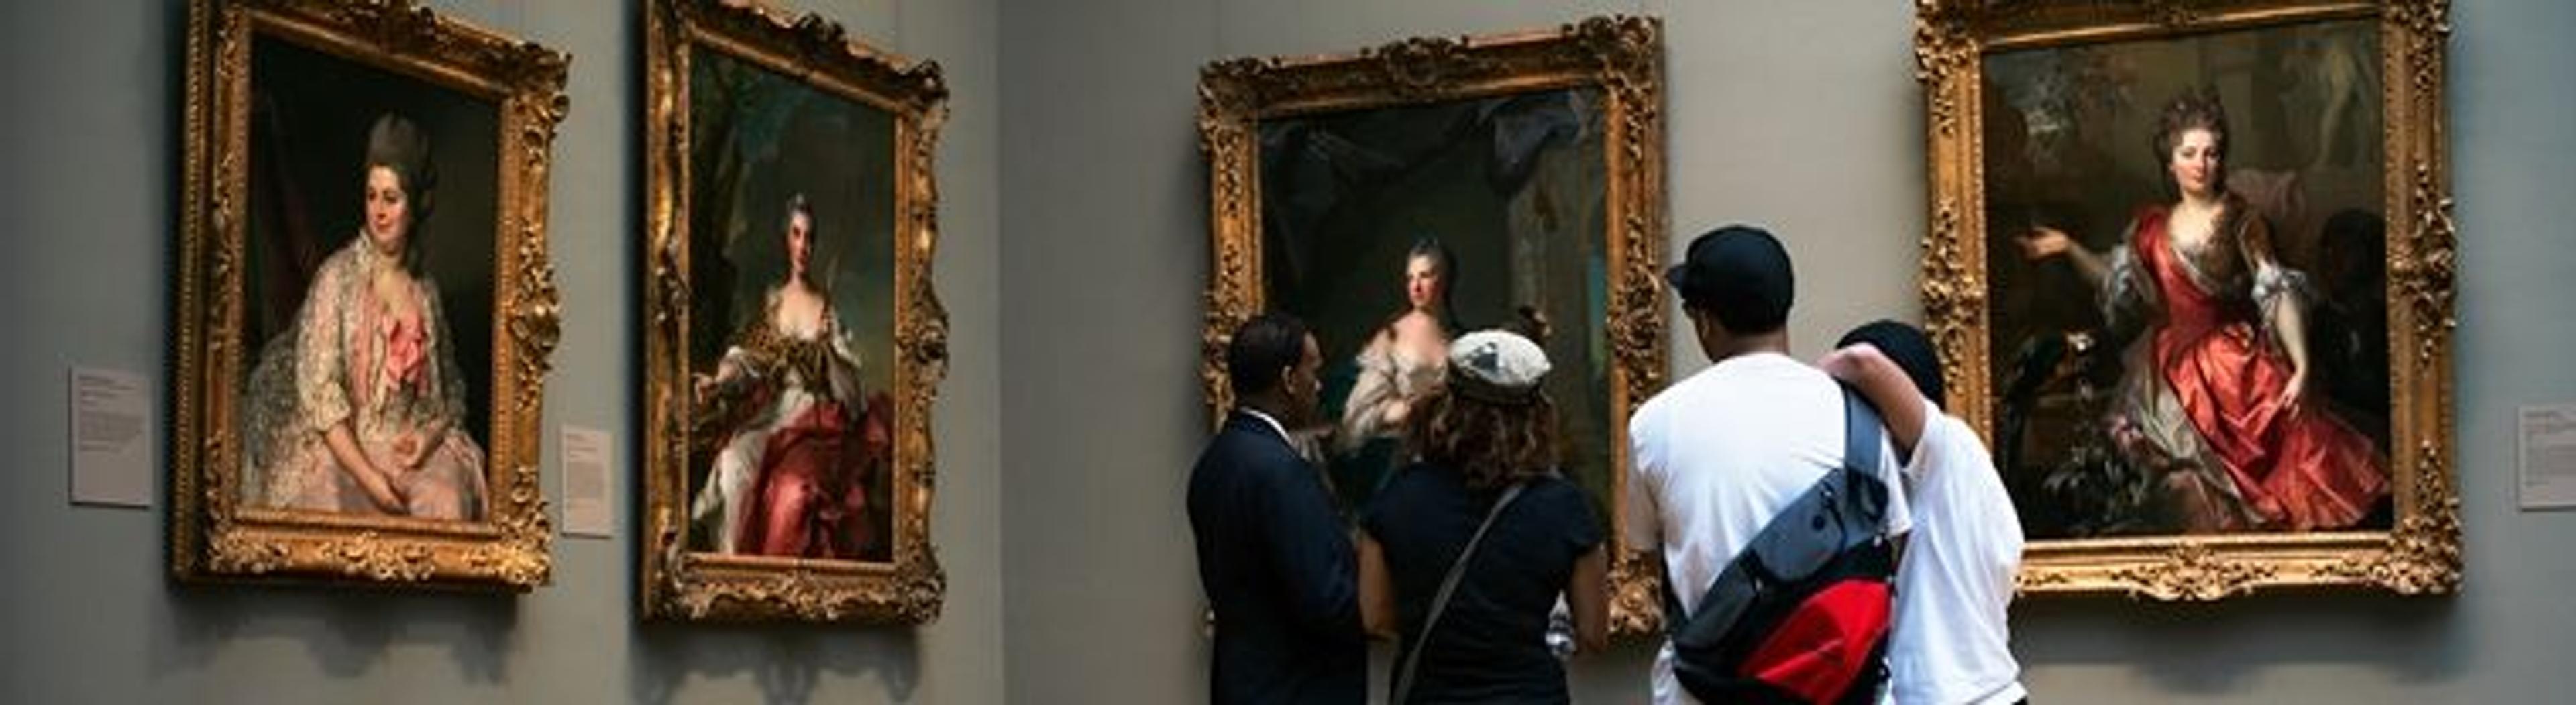 A group of museumgoers look at European paintings on view in a gallery